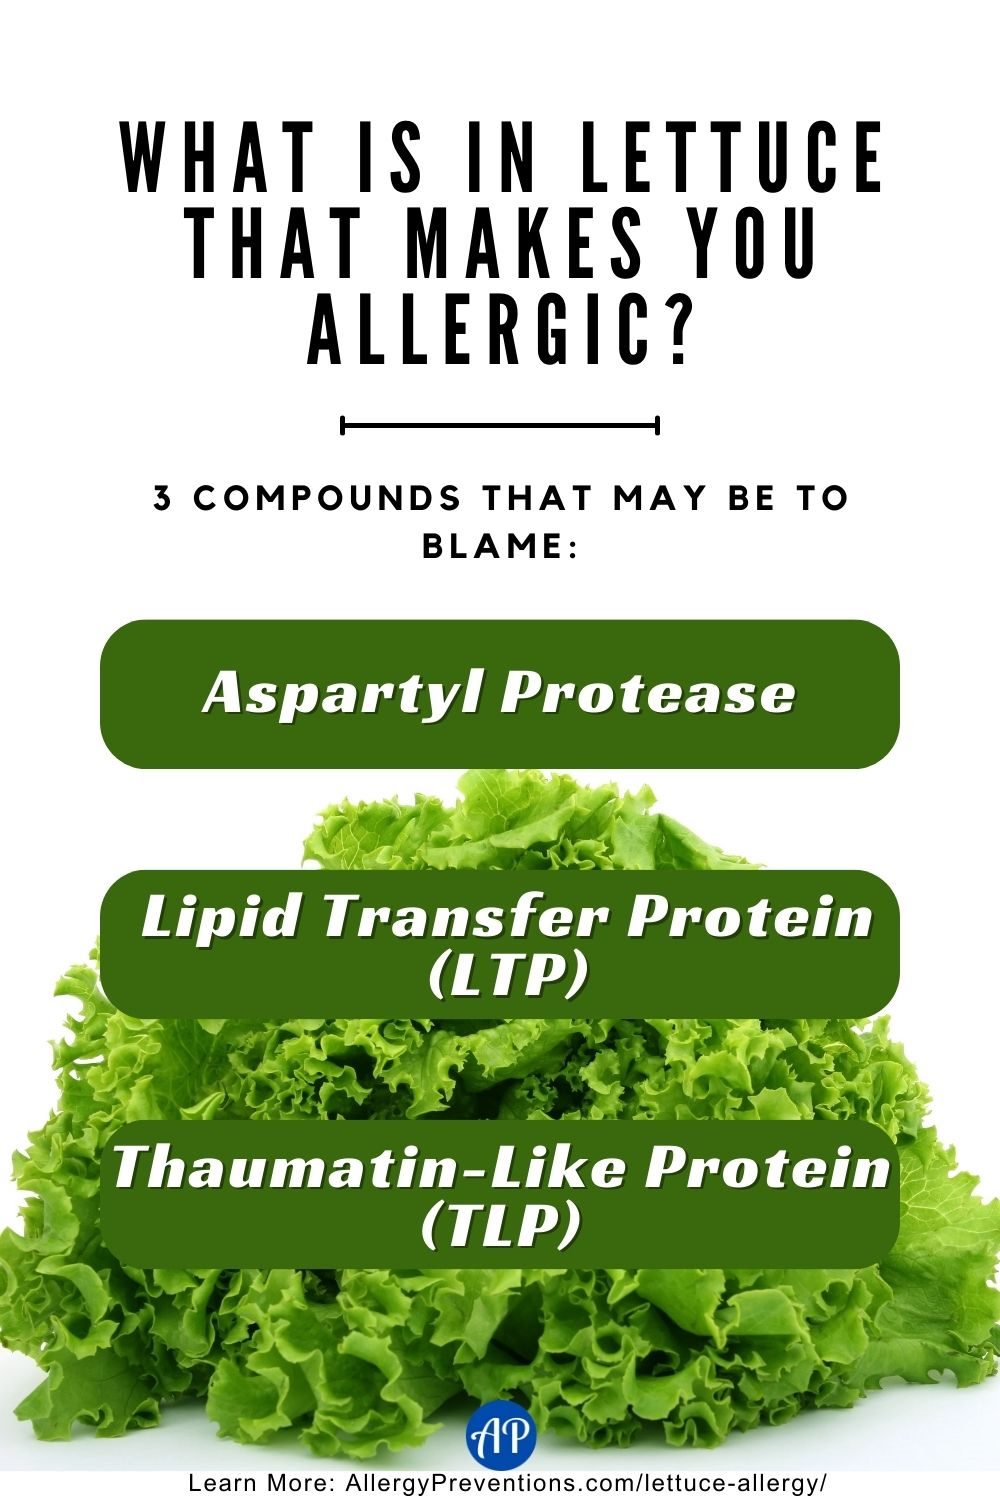 What is in lettuce that makes you allergic infographic. 3 compounds that may be to blame for a lettuce allergy: Aspartyl Protease, Lipid Transfer Protein (LTP), and Thaumatin-Like Protein (TLP).